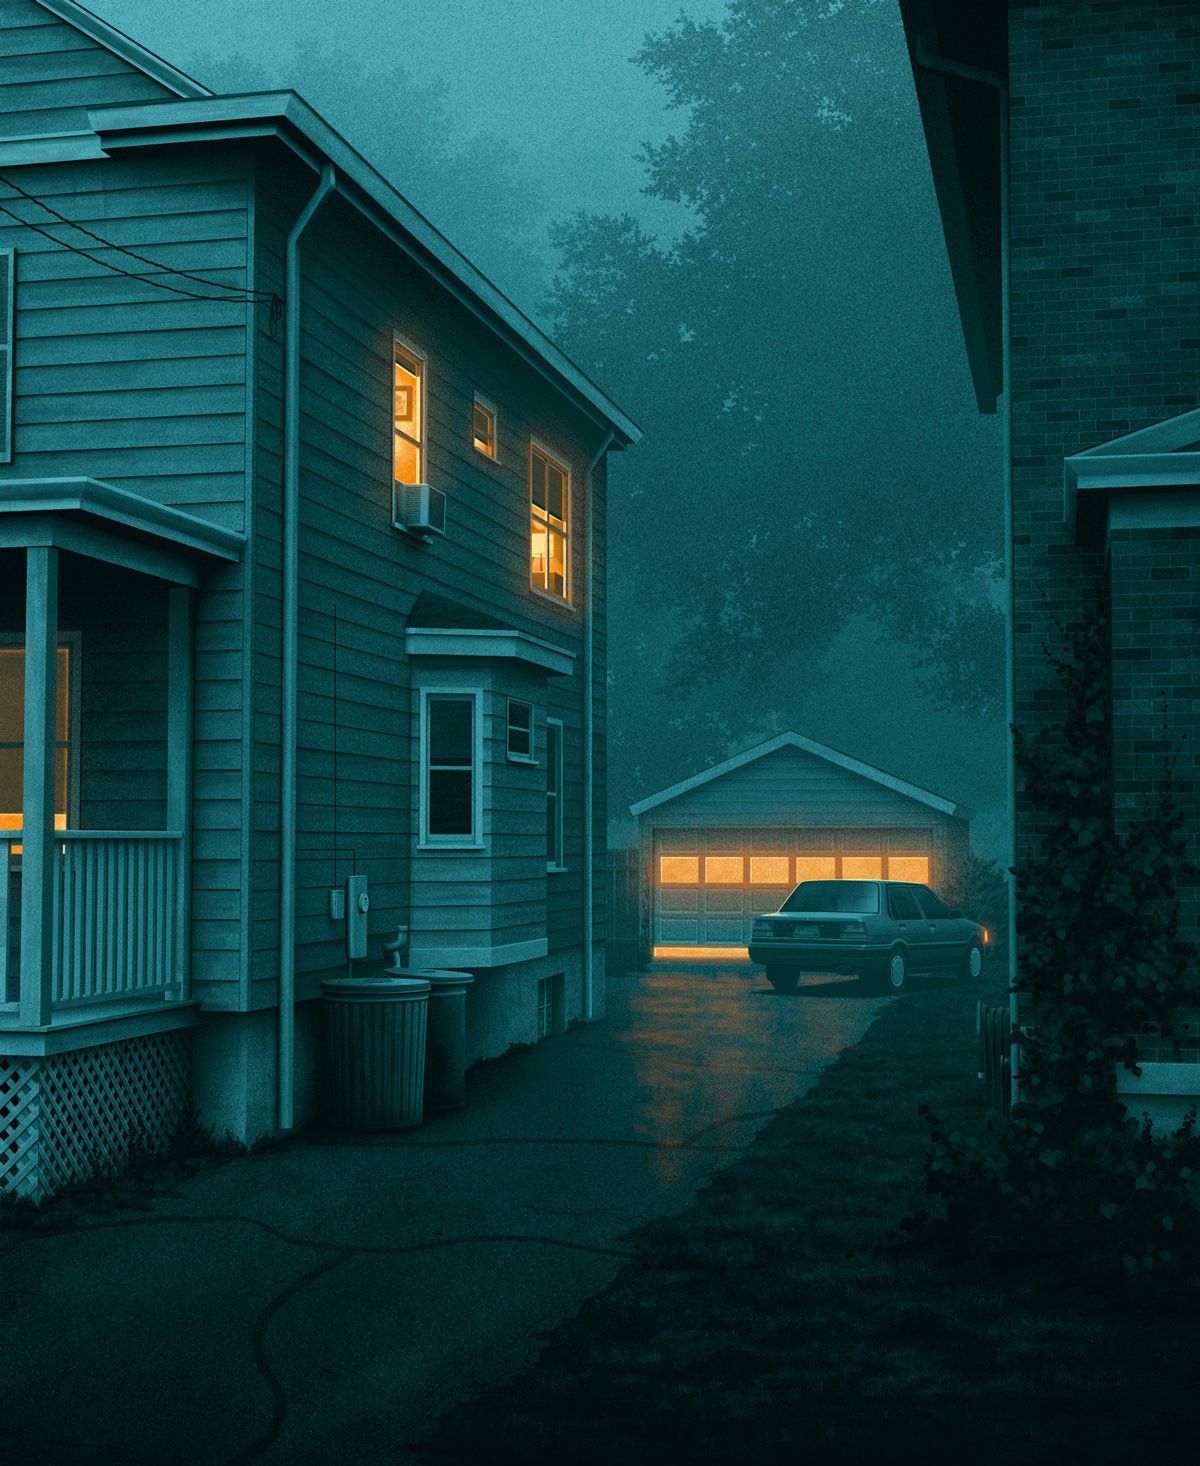 Nighttime Nostalgia Delightful Paintings By Nicholas Moegly 2